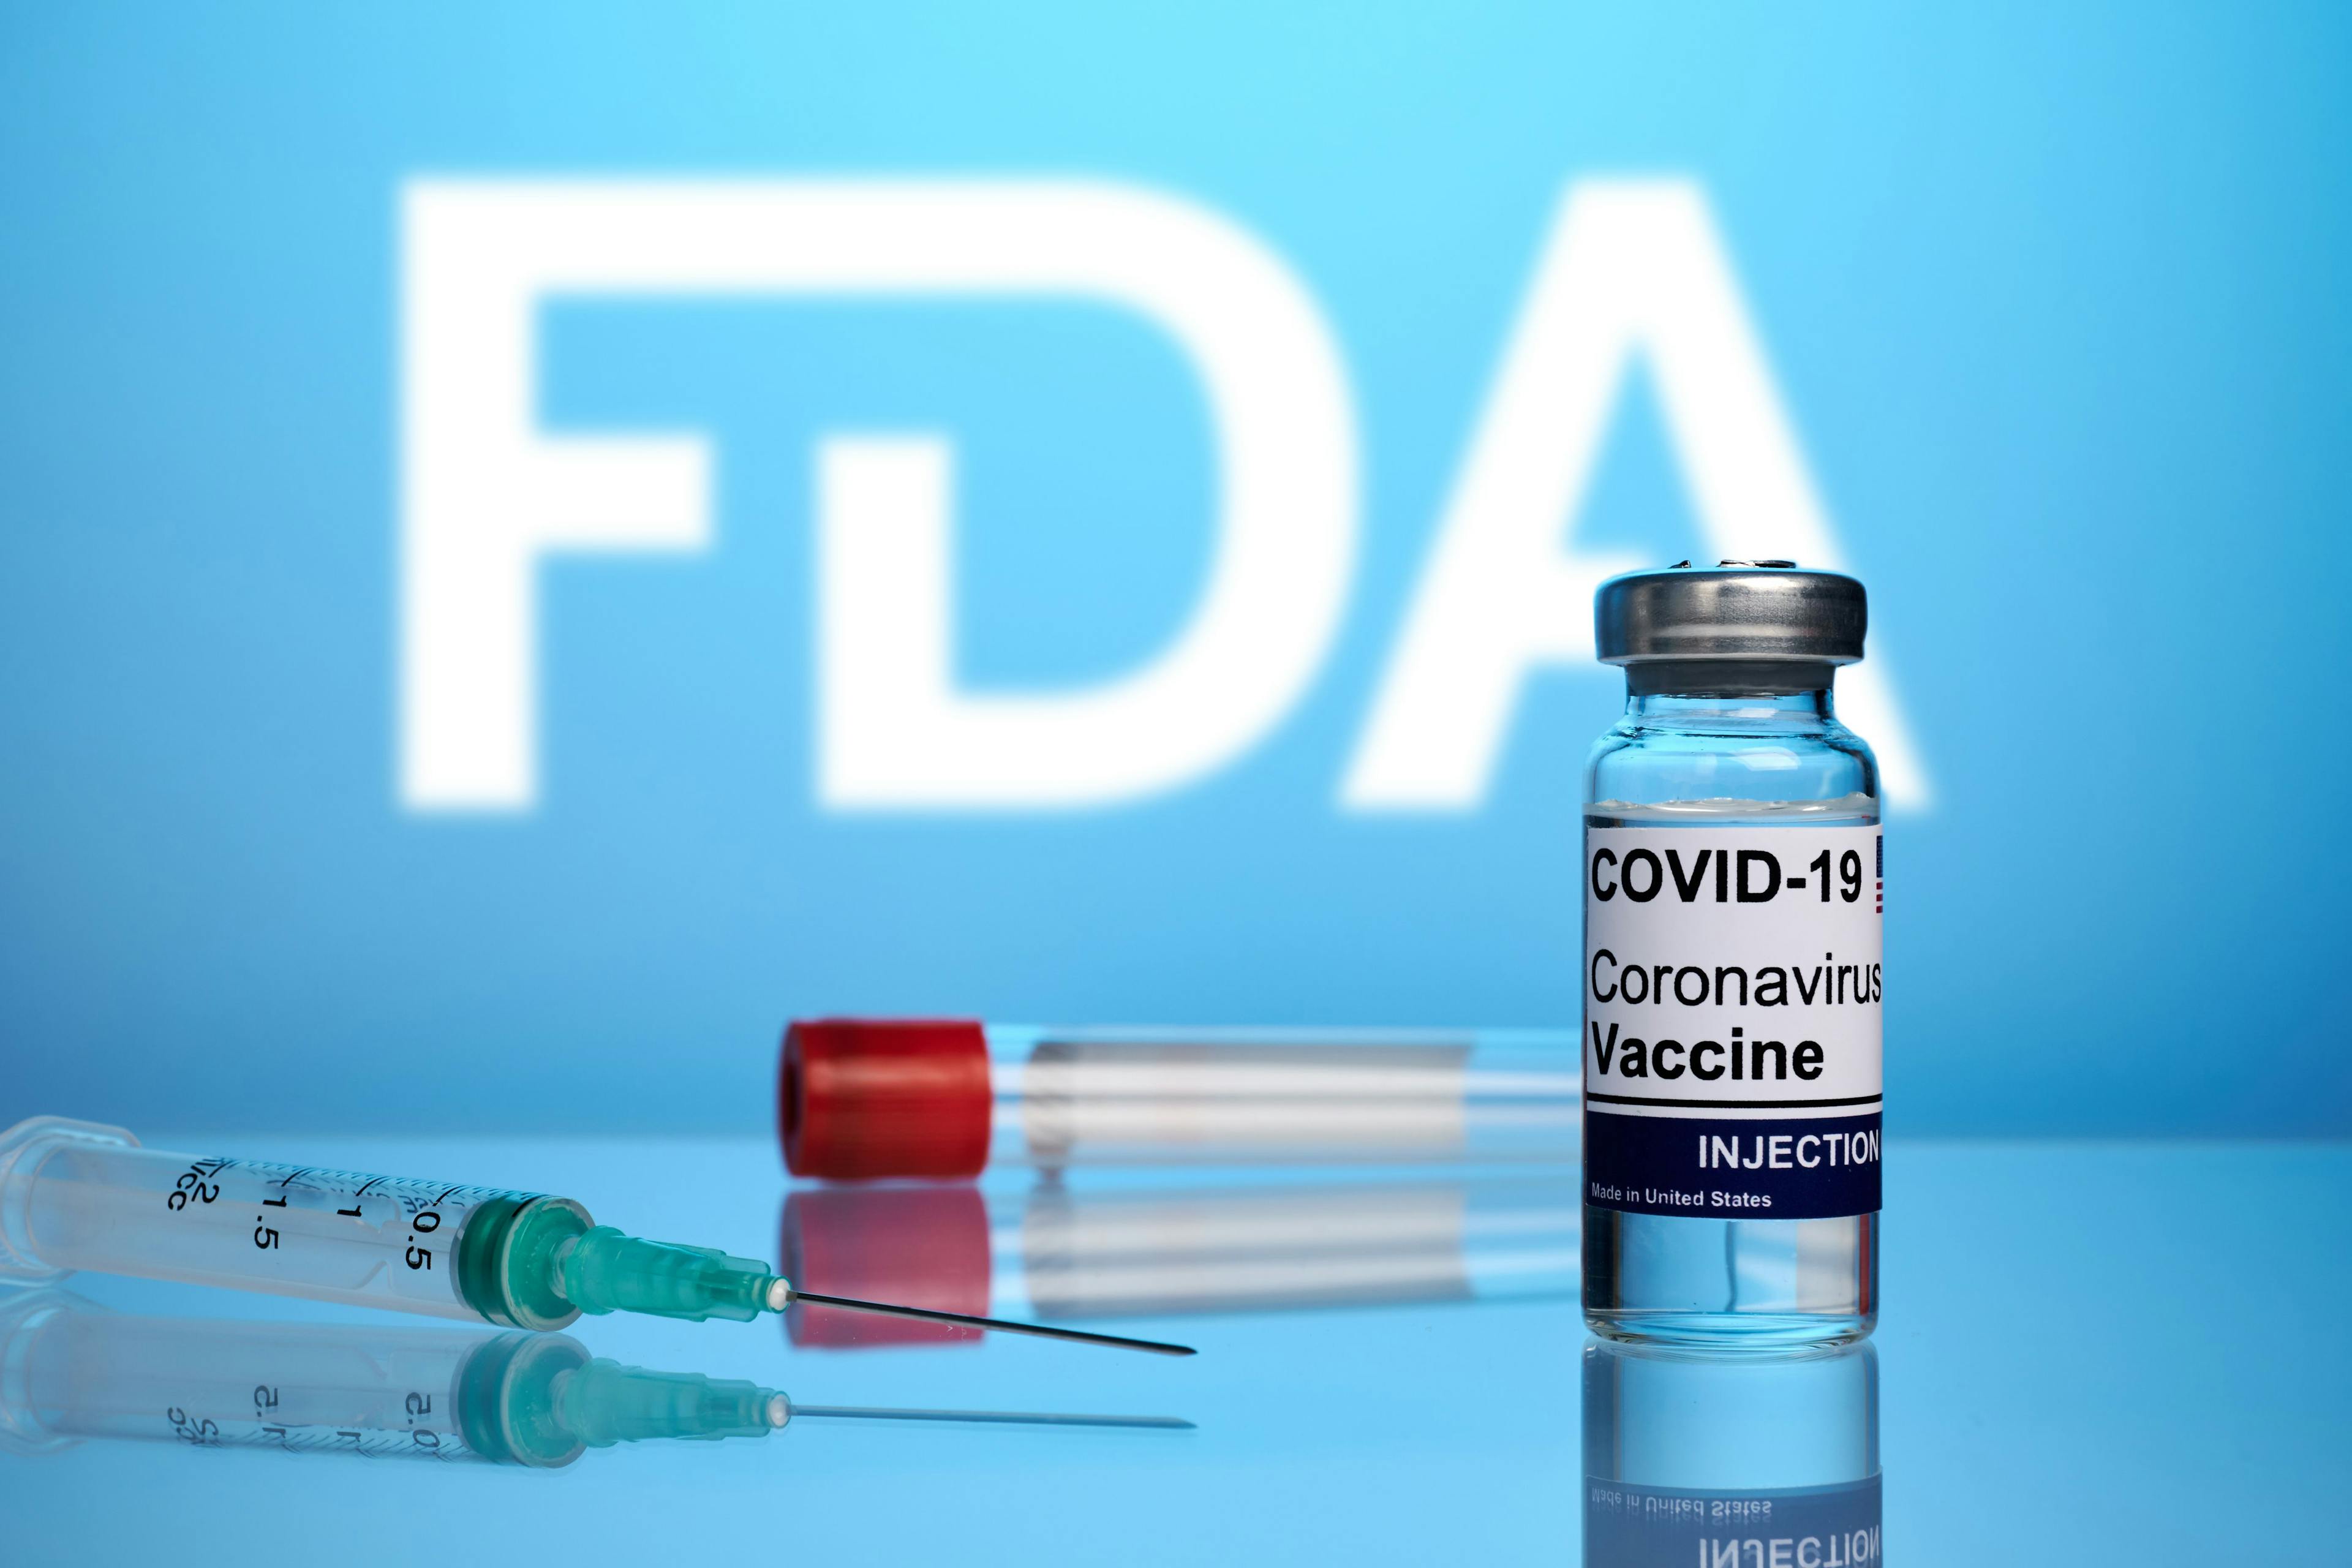 COVID-19 Vaccines Should Be Monovalent and Contain the XBB Strain, FDA Committee Recommends